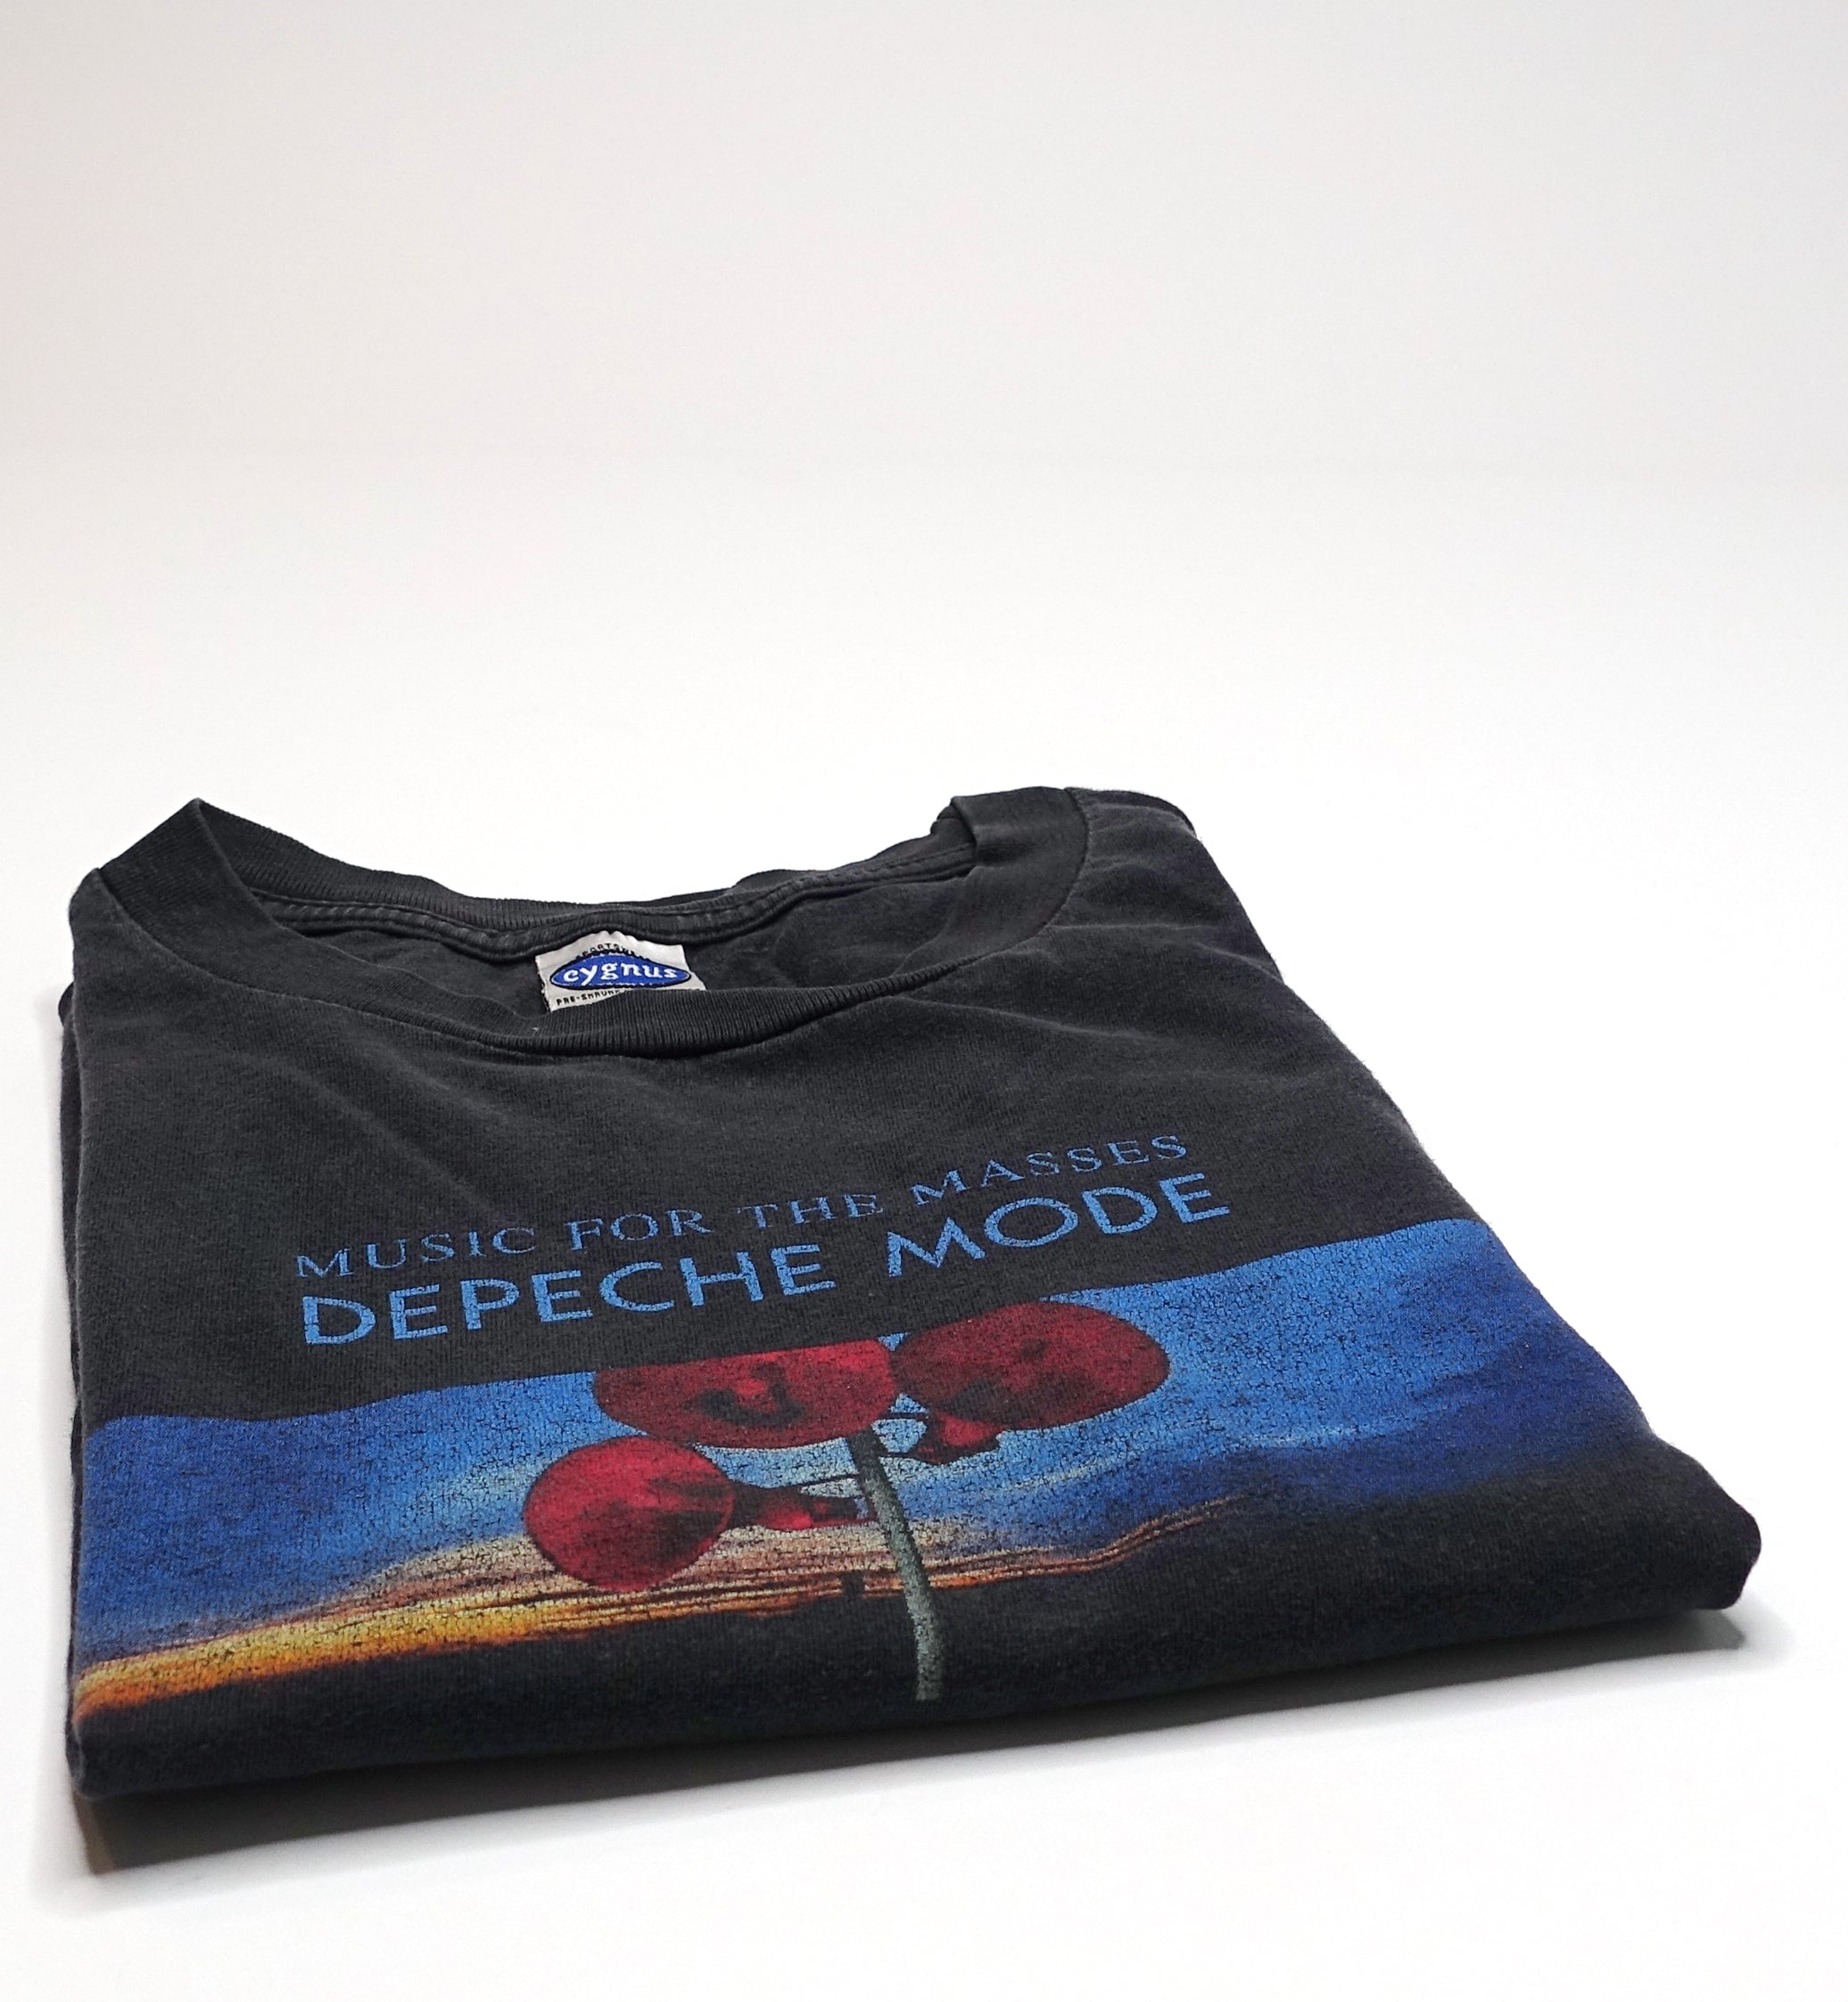 Depeche Mode – Music For The Masses Size XL